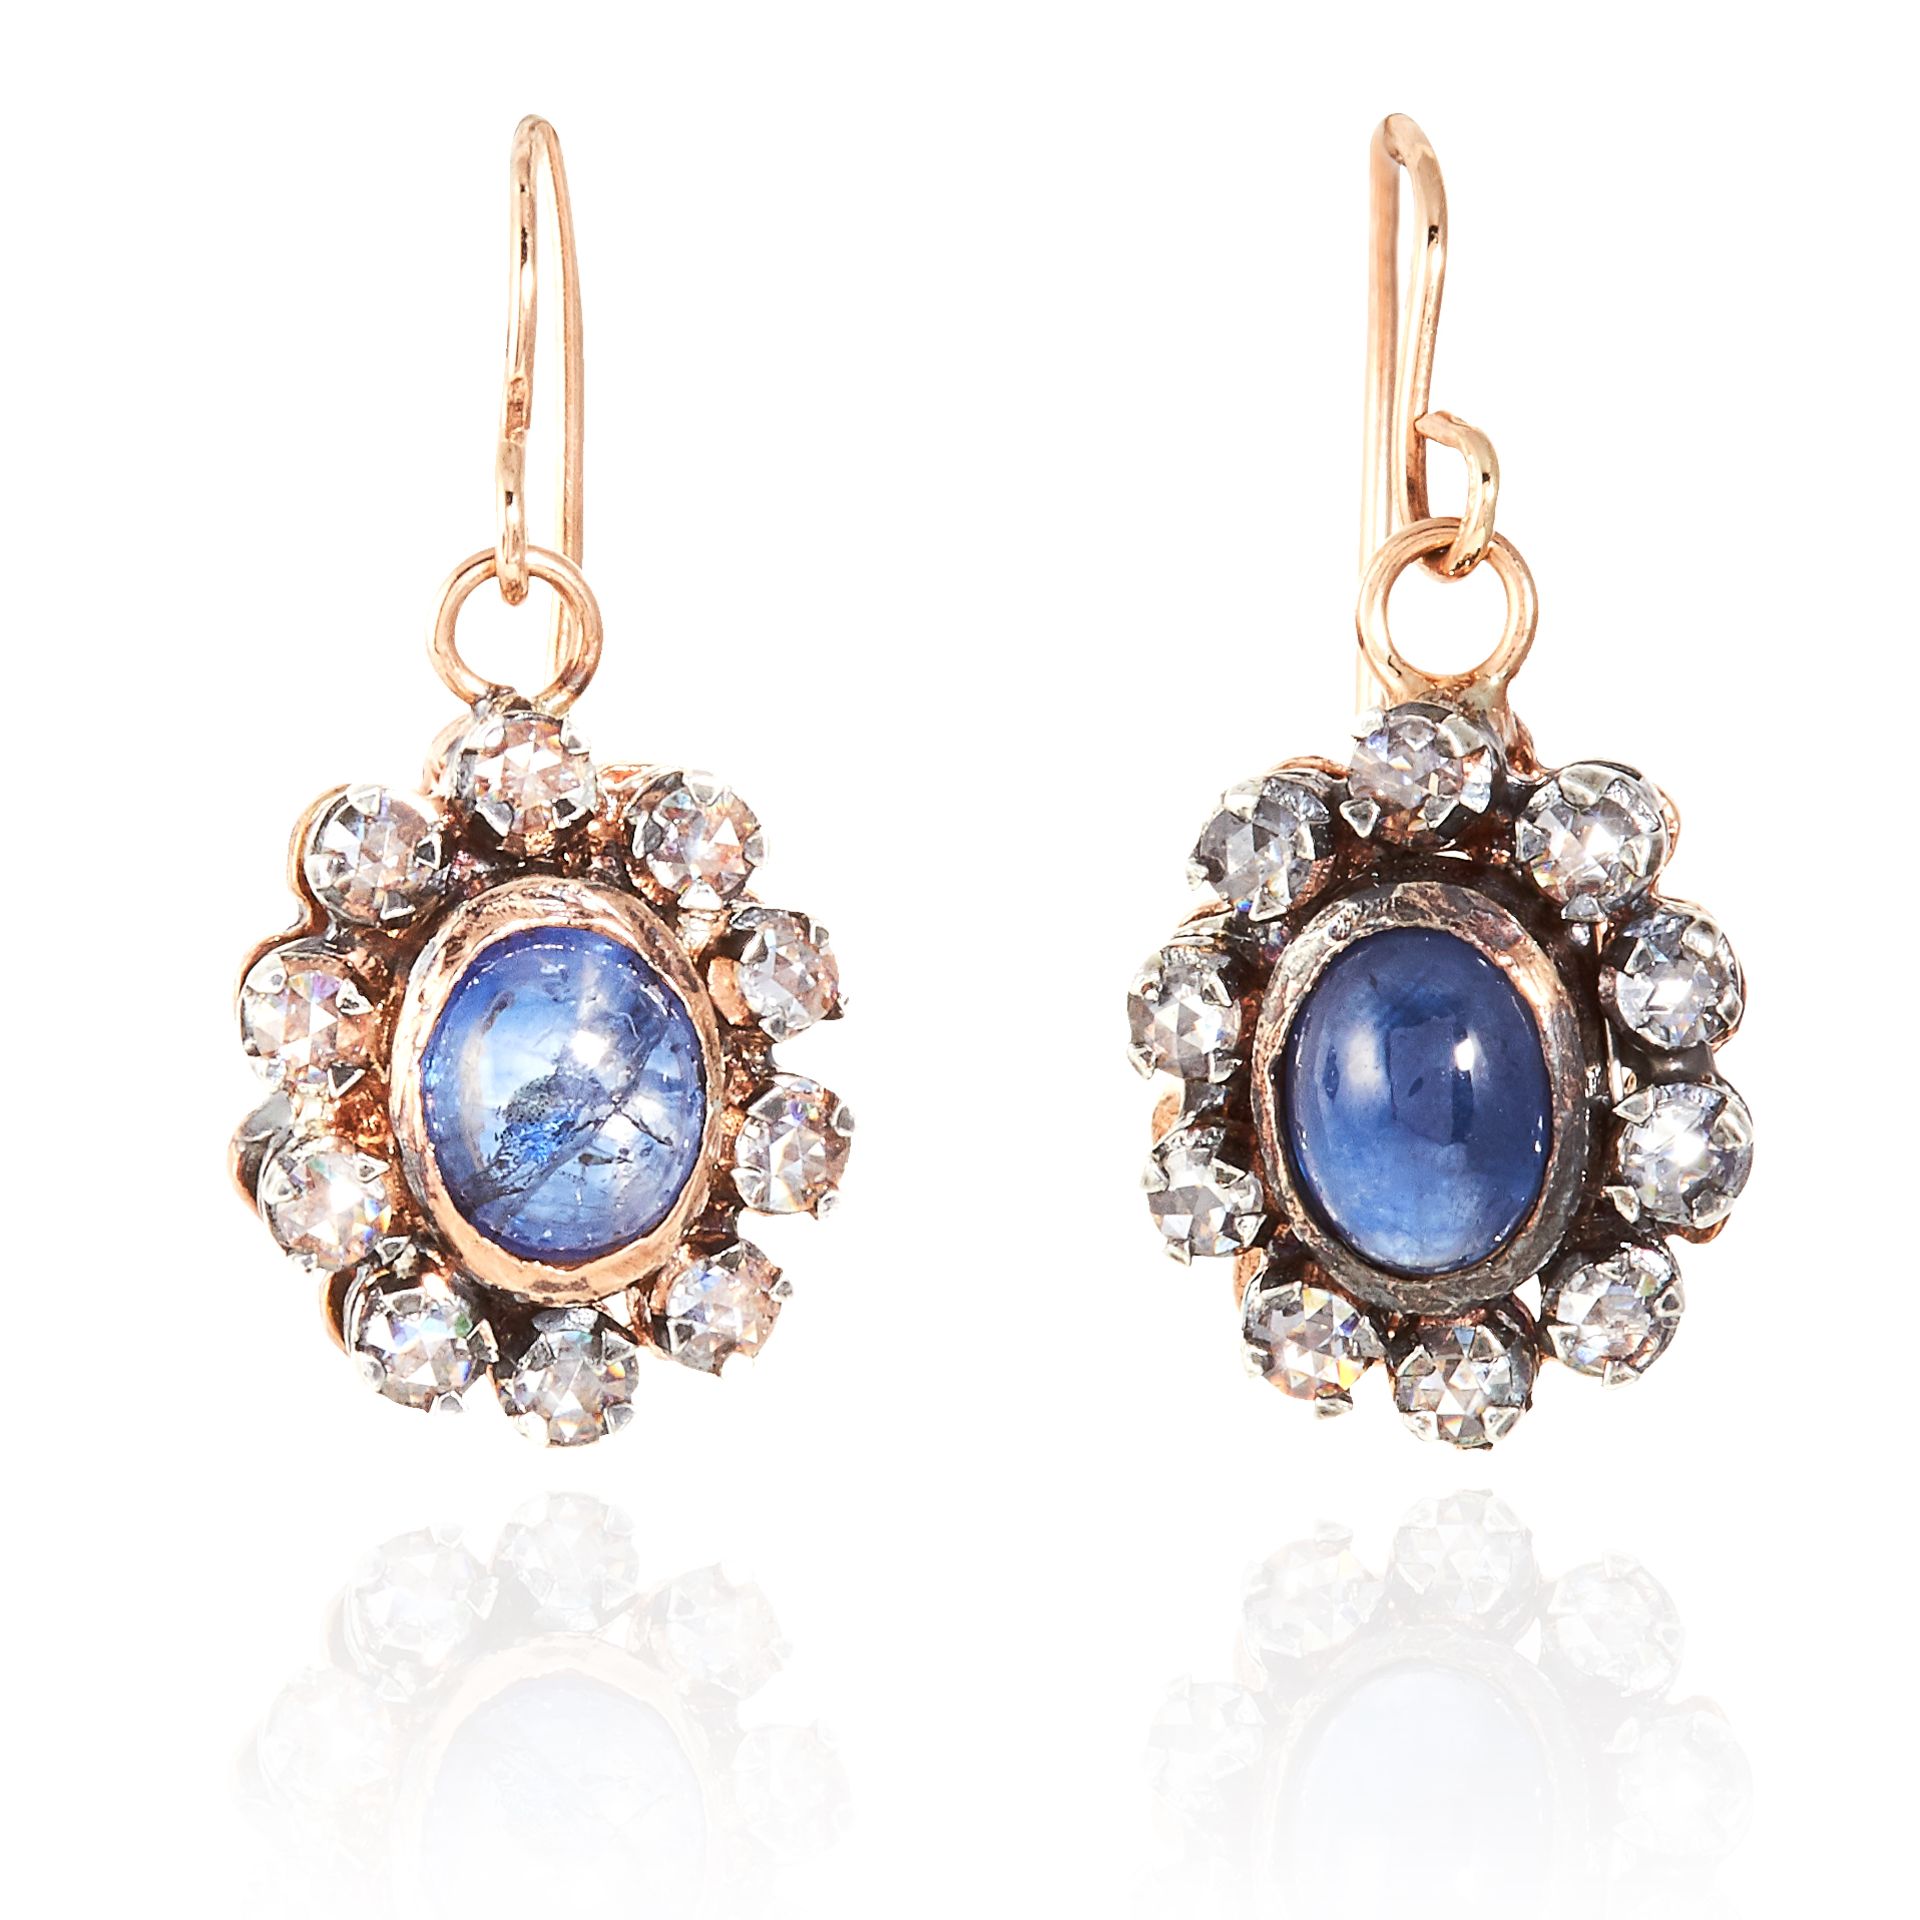 A PAIR OF ANTIQUE SAPPHIRE AND DIAMOND EARRINGS in yellow gold and silver, each with a cabochon